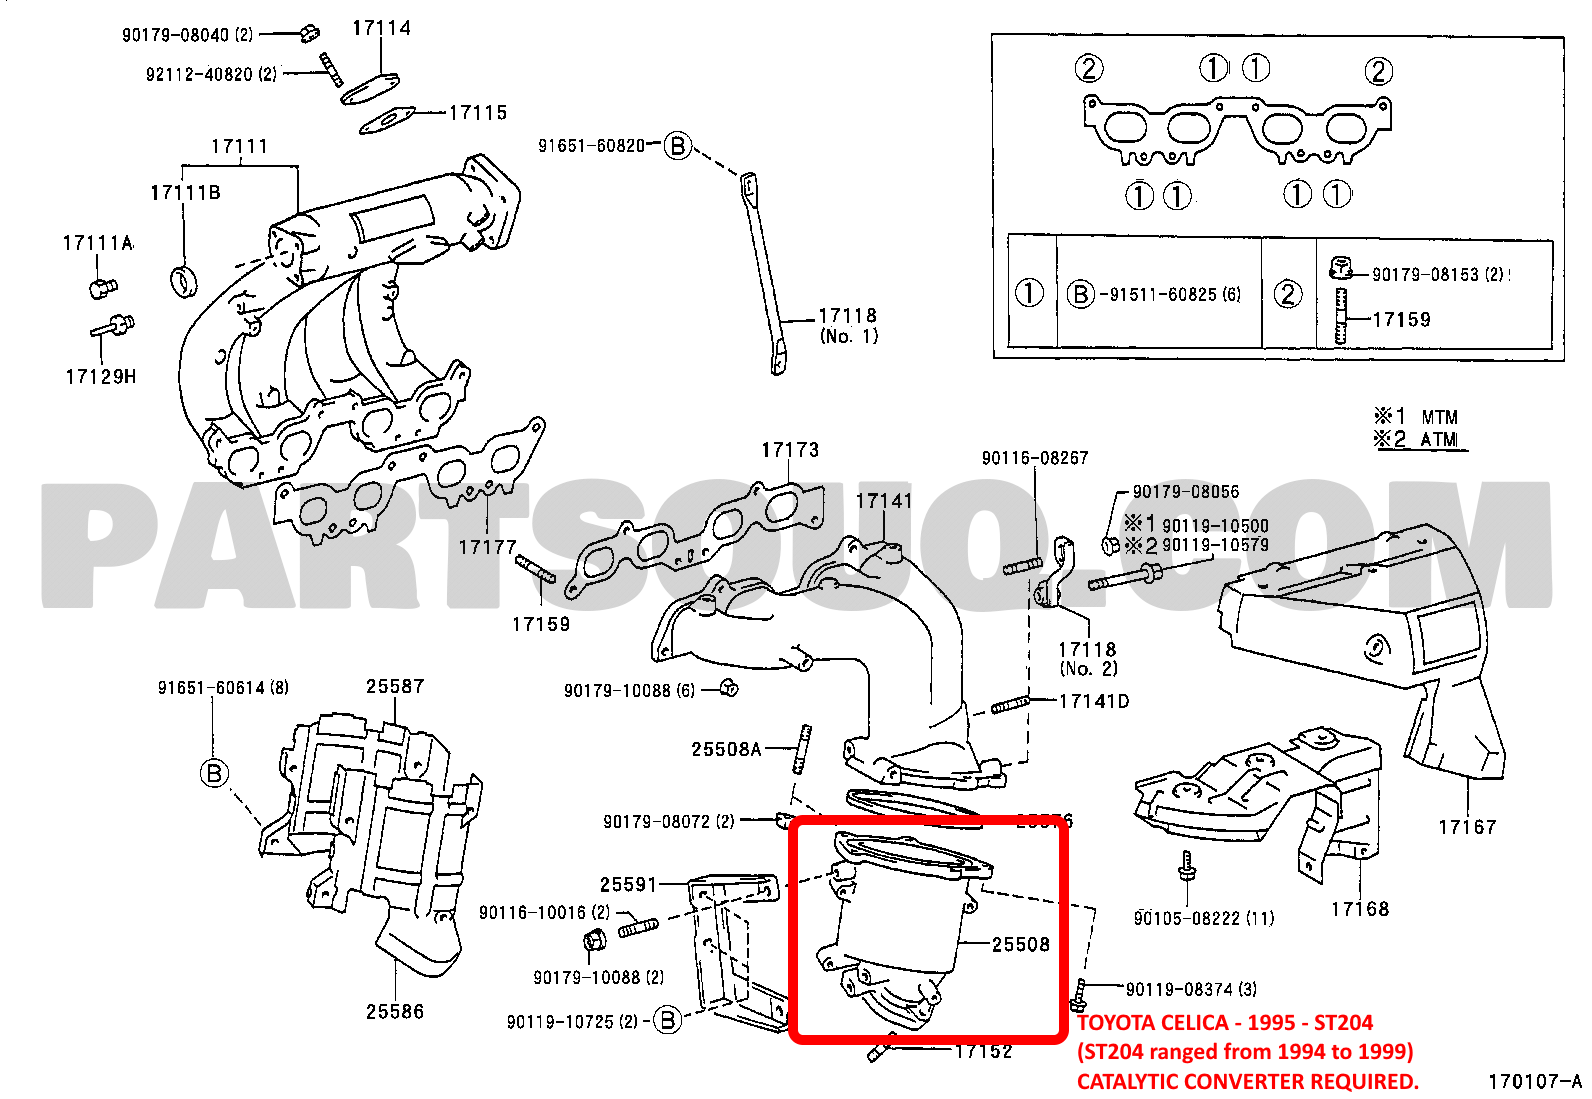 Toyota Celica Hatch 1995 used car part search Catalytic Converter (vertical mount off the exhaust manifold, see part list image attached)
Used in the ST204 Celica range 19